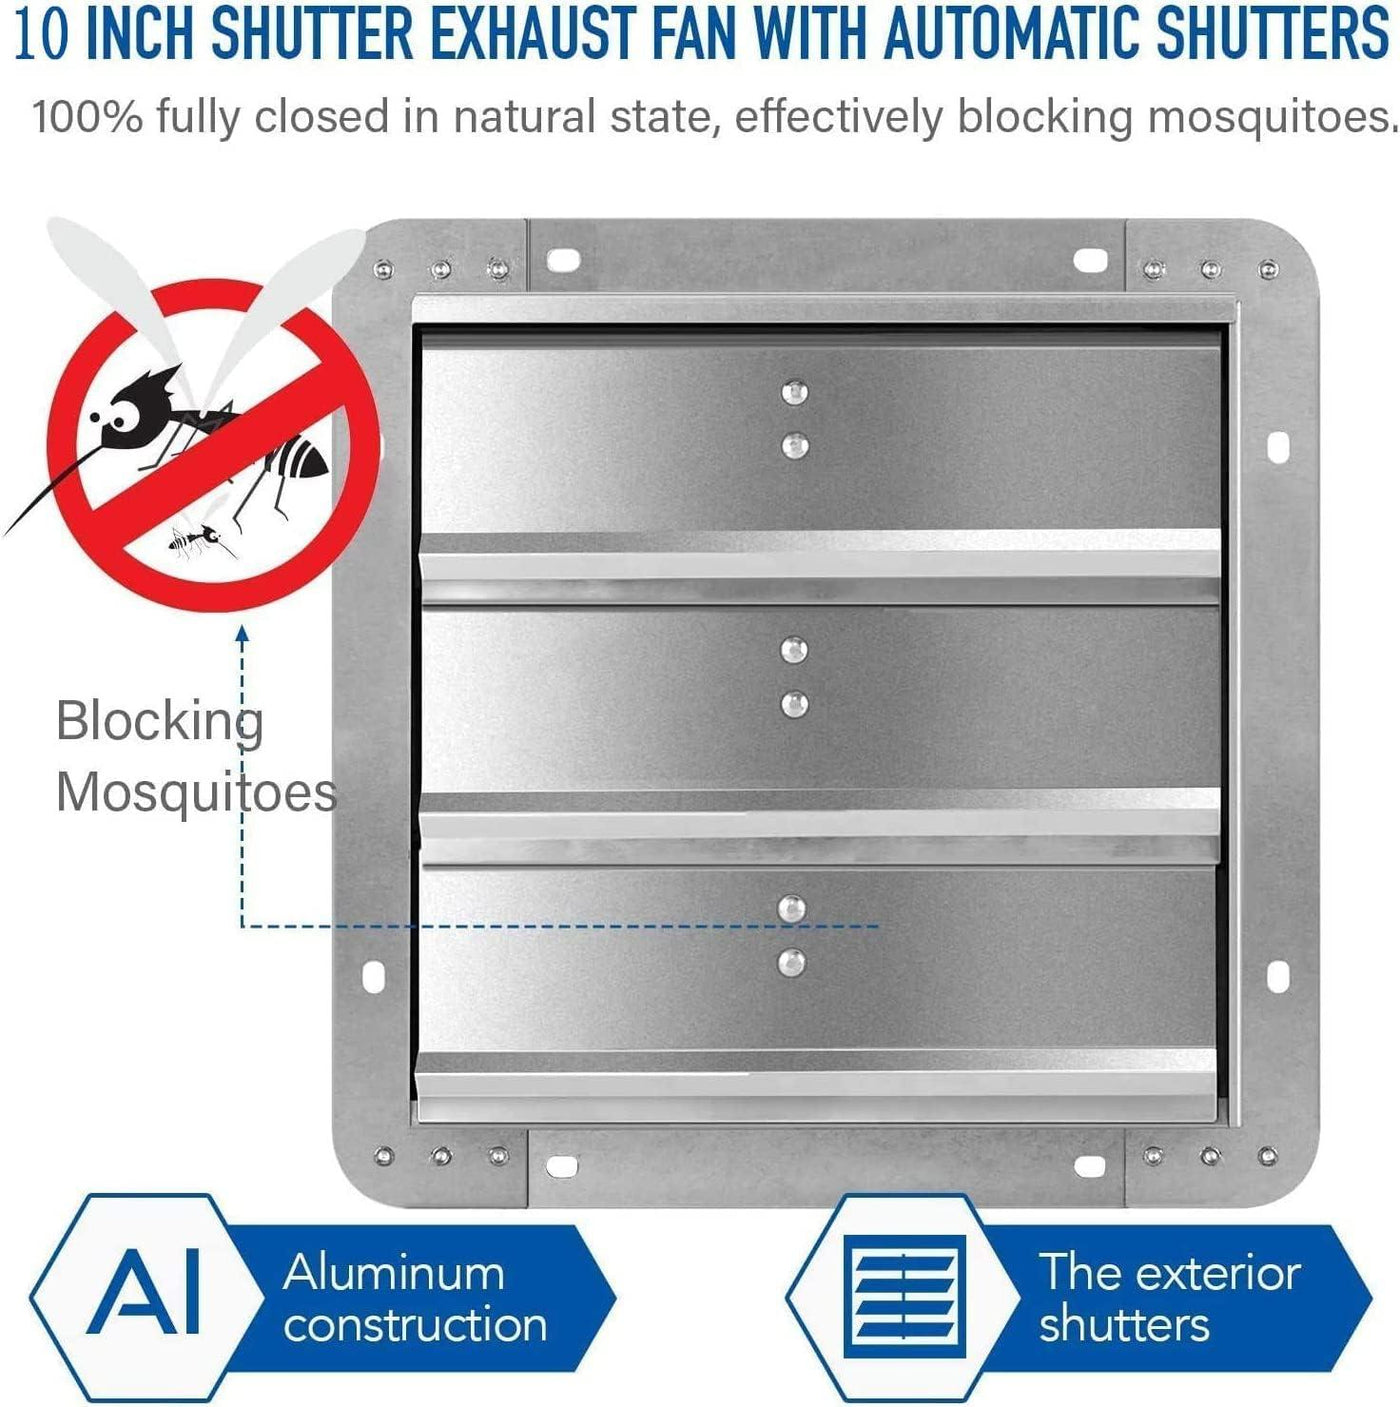 10-Inch Shutter Exhaust Fan - Variable Speed for Efficient Ventilation - Massive Discounts